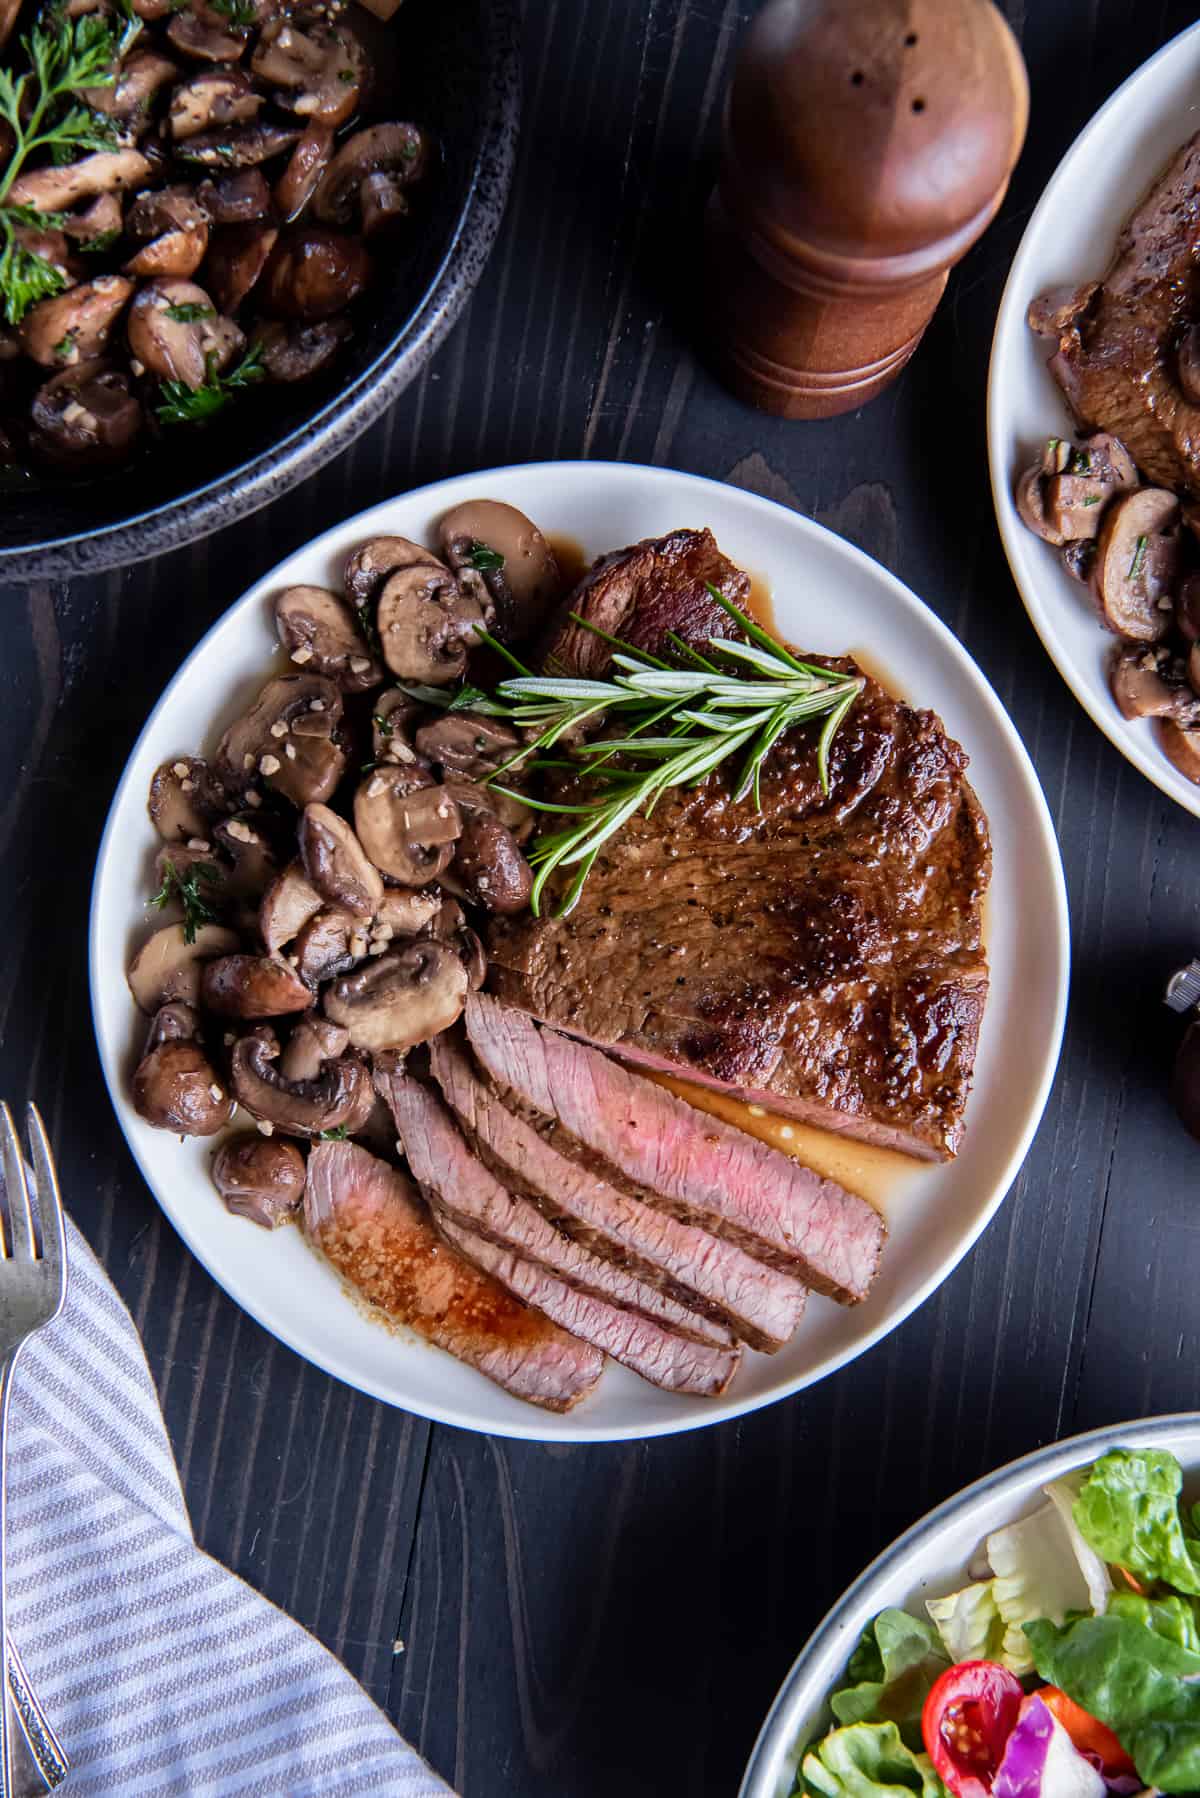 A top down shot of a dinner plate with sliced steak and mushrooms surrounded by a bowl of salad and a bowl of sauteed mushrooms.